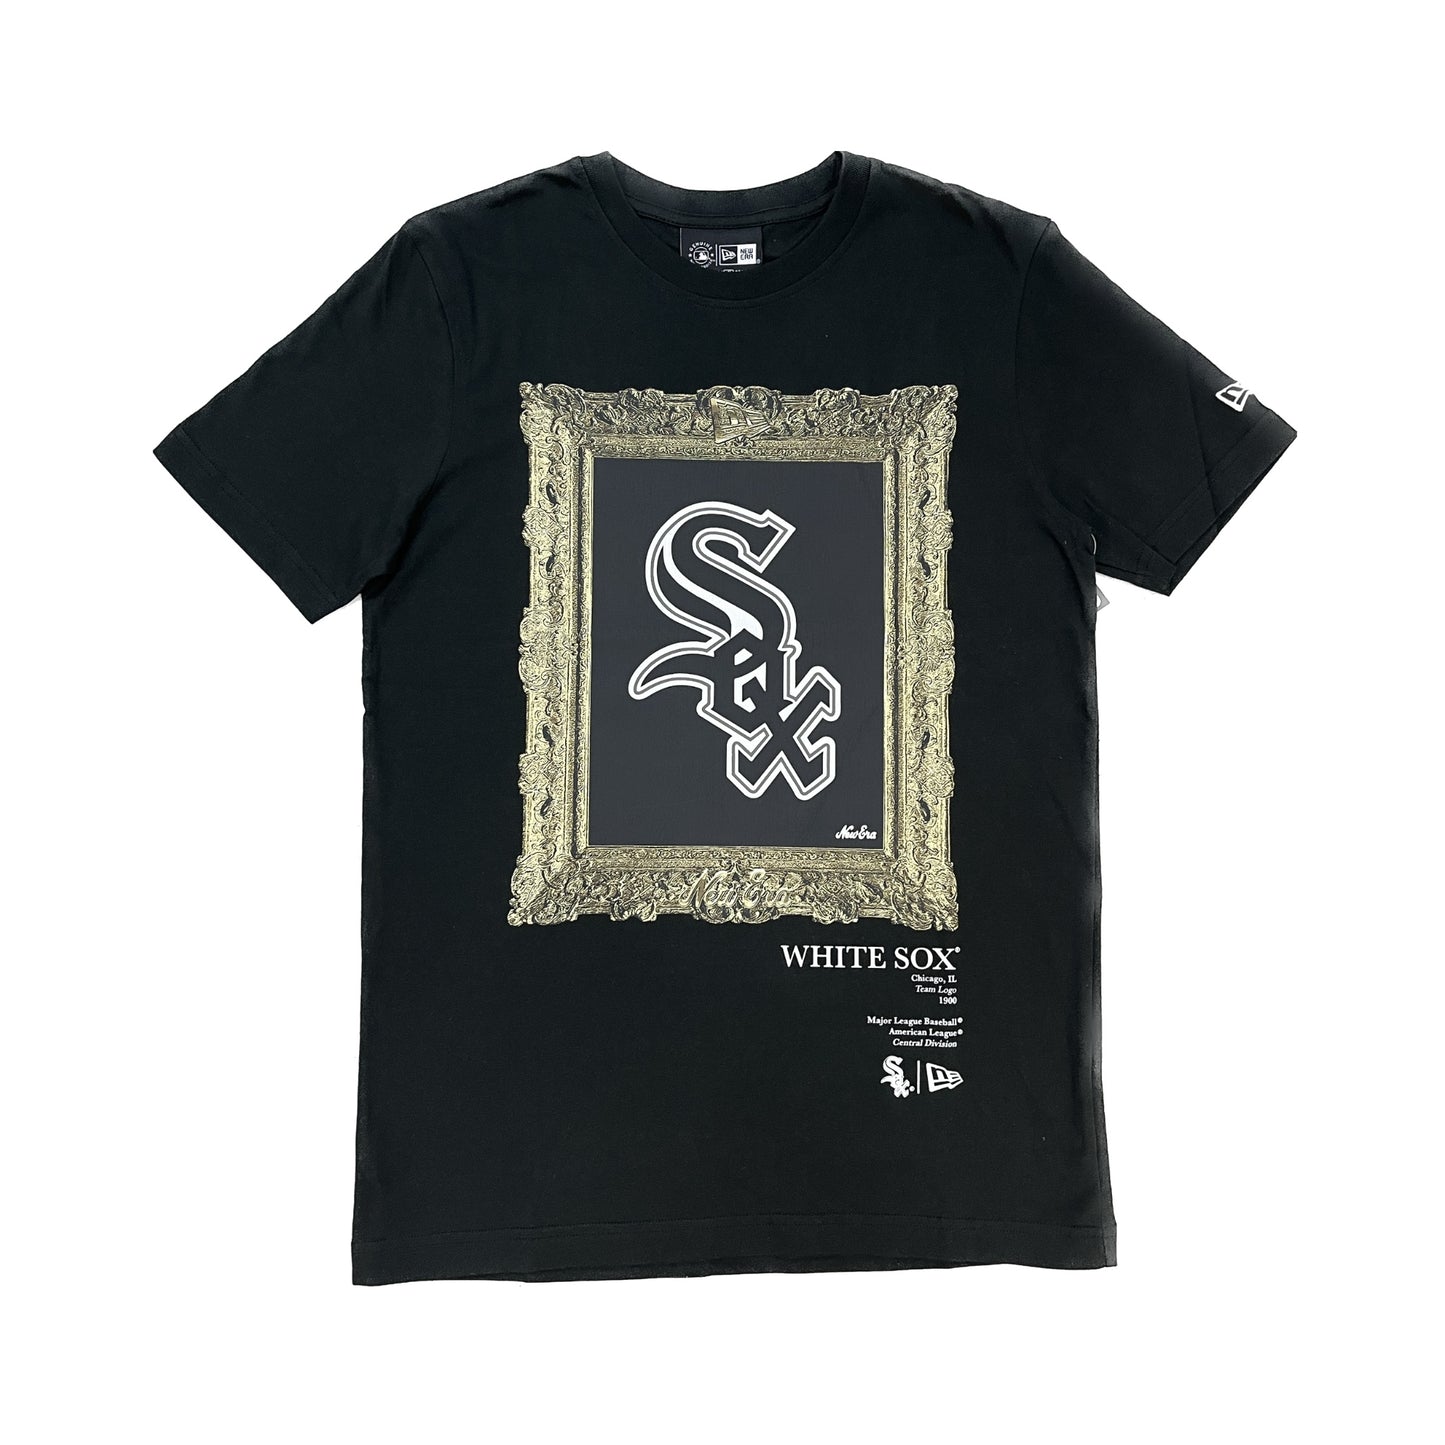 New Era MLB The Cooperstown Collection Chicago White Sox Tee Black